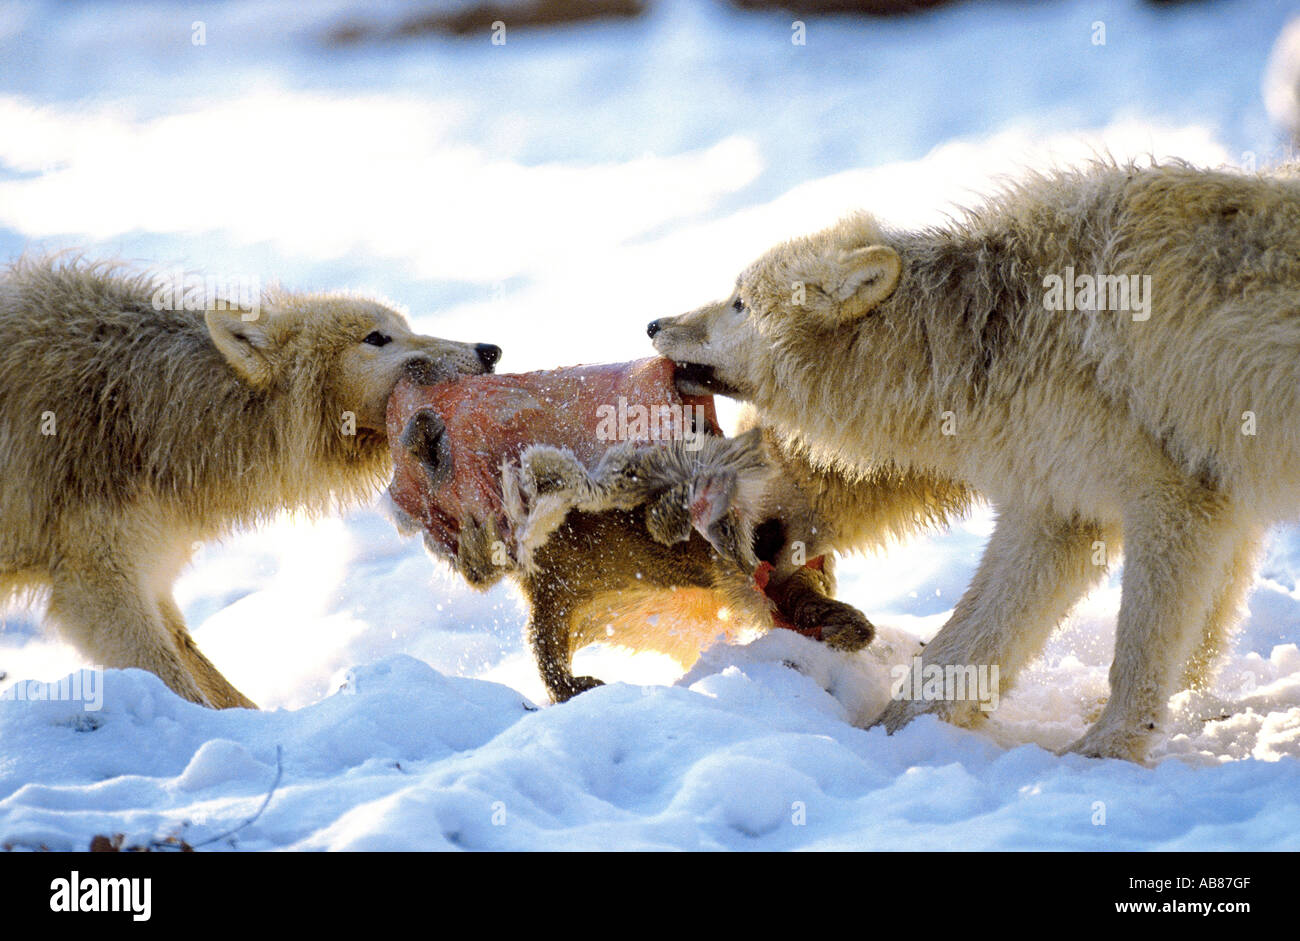 arctic wolf, tundra wolf (Canis lupus albus), youngs scramblin for prey, Germany, Saarland, Merzig Stock Photo